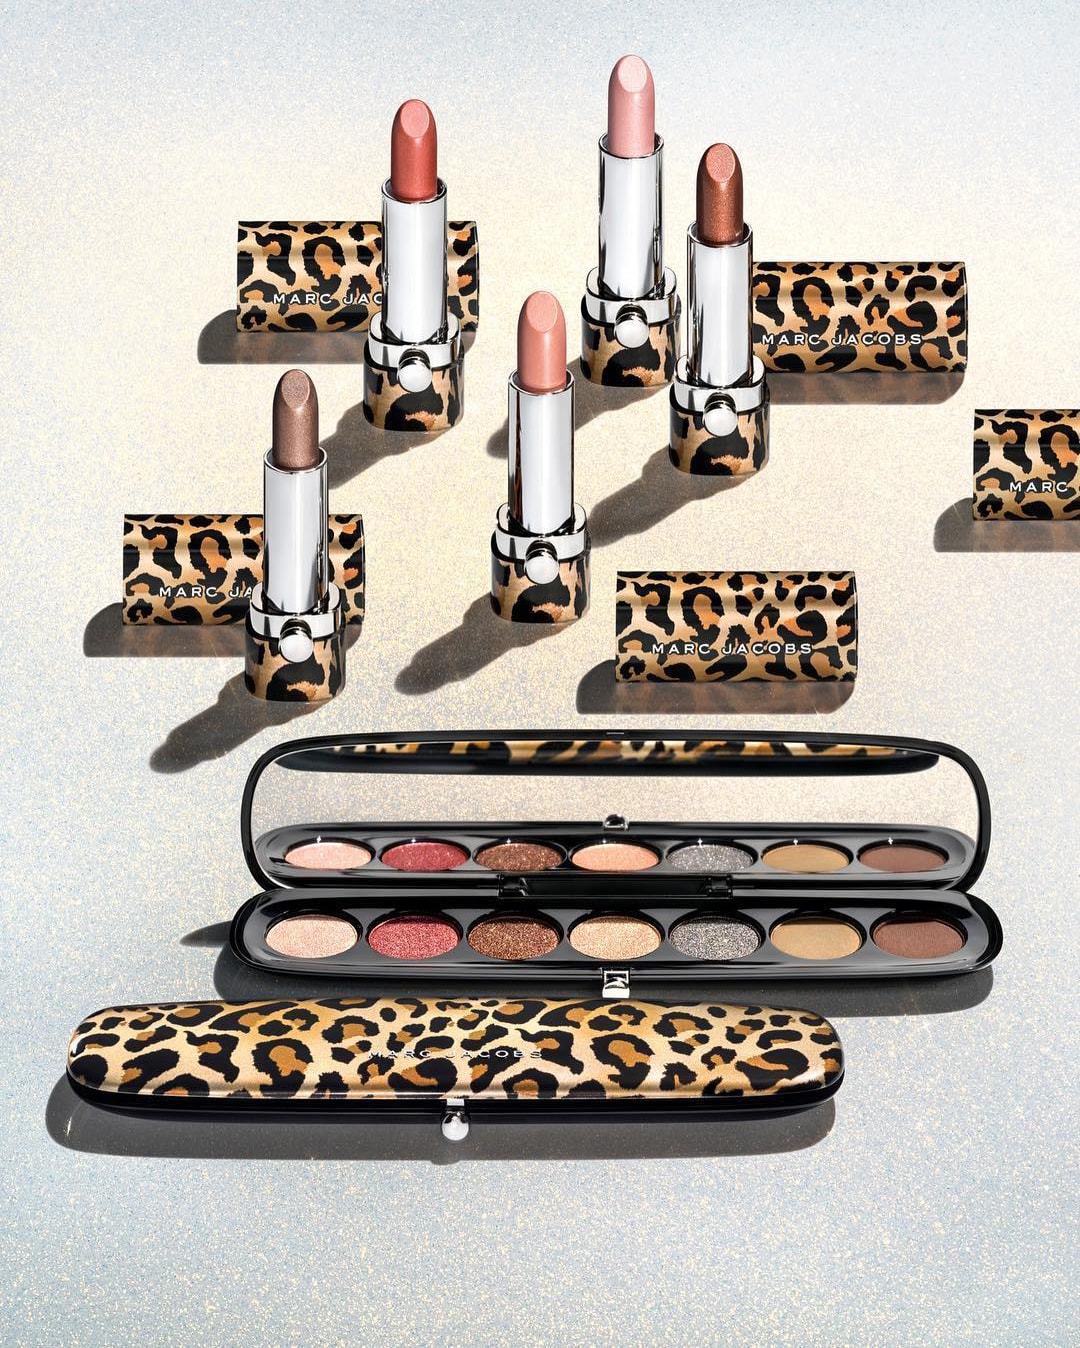 Marc Jacobs Beauty Leopard Frost Collection Makeup Lipstick Eyeshadow Shimmer Glitter 